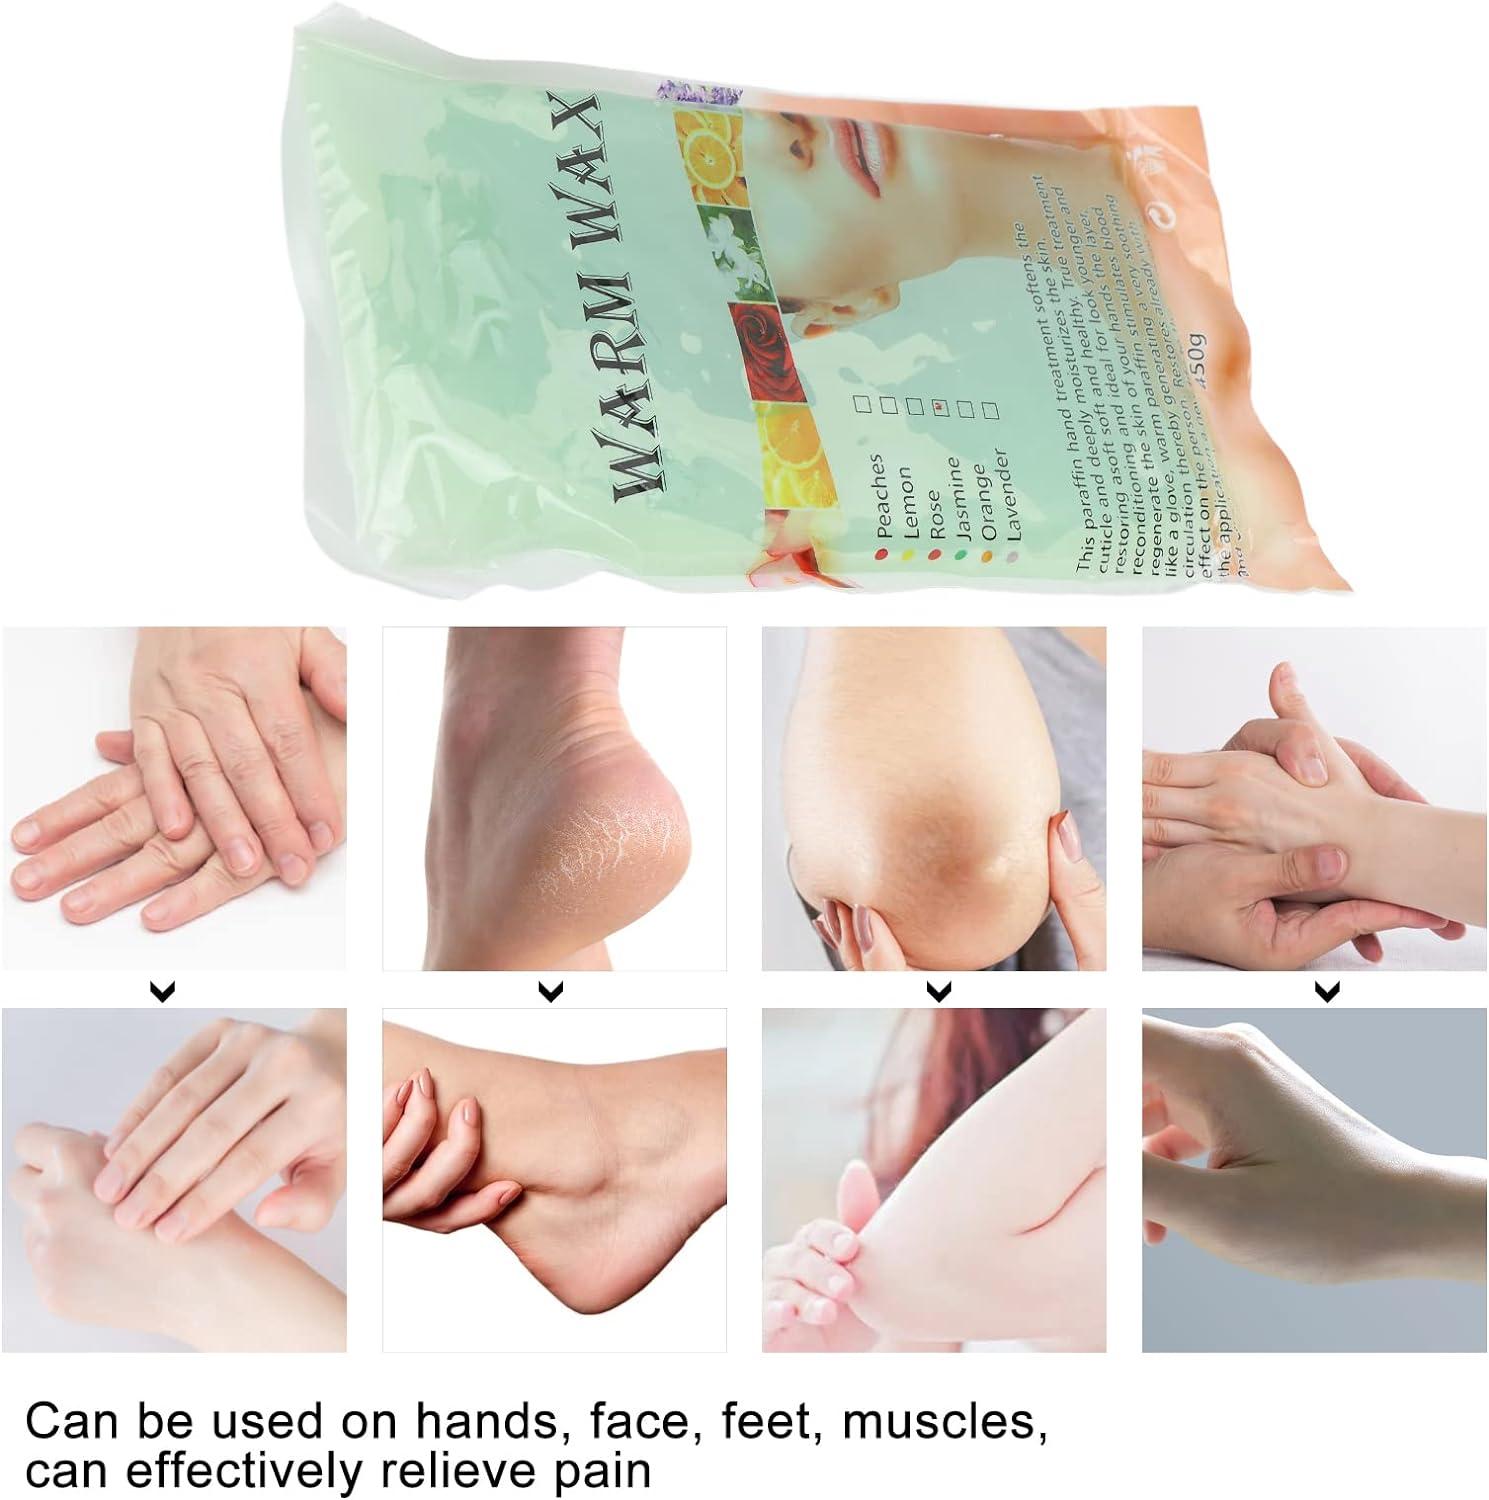 Amazon.com : Clean + Easy Hands and Feet Protectors, Paraffin Wax Bath  Liners (100 count) : Hair Waxing Tools : Beauty & Personal Care